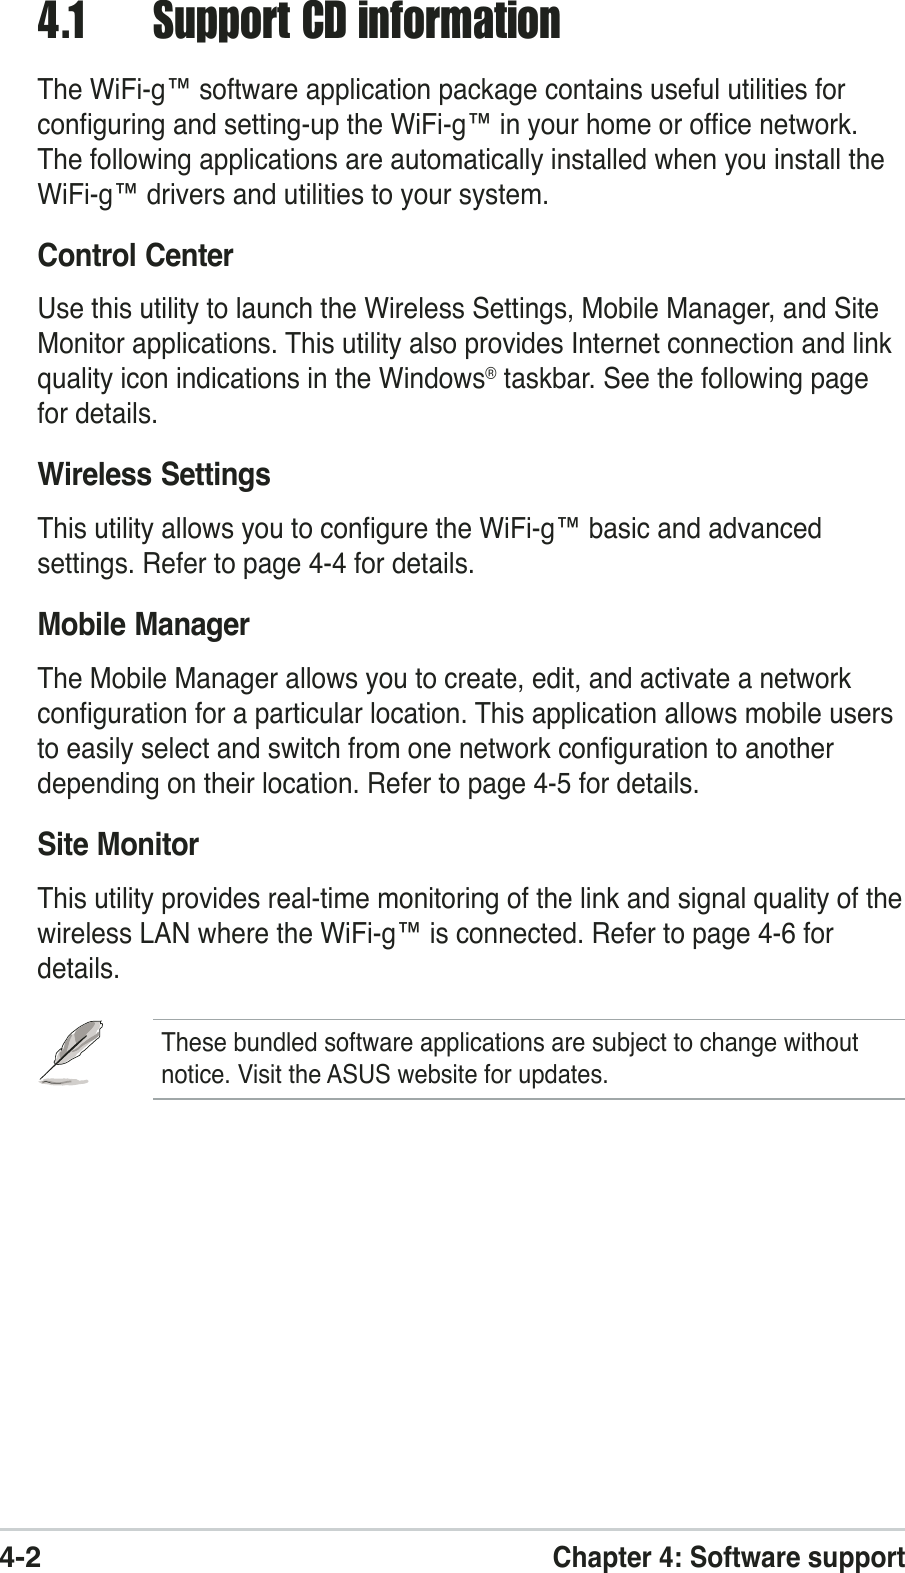 4-2Chapter 4: Software support4.1 Support CD informationThe WiFi-g™ software application package contains useful utilities forconfiguring and setting-up the WiFi-g™ in your home or office network.The following applications are automatically installed when you install theWiFi-g™ drivers and utilities to your system.Control CenterUse this utility to launch the Wireless Settings, Mobile Manager, and SiteMonitor applications. This utility also provides Internet connection and linkquality icon indications in the Windows® taskbar. See the following pagefor details.Wireless SettingsThis utility allows you to configure the WiFi-g™ basic and advancedsettings. Refer to page 4-4 for details.Mobile ManagerThe Mobile Manager allows you to create, edit, and activate a networkconfiguration for a particular location. This application allows mobile usersto easily select and switch from one network configuration to anotherdepending on their location. Refer to page 4-5 for details.Site MonitorThis utility provides real-time monitoring of the link and signal quality of thewireless LAN where the WiFi-g™ is connected. Refer to page 4-6 fordetails.These bundled software applications are subject to change withoutnotice. Visit the ASUS website for updates.